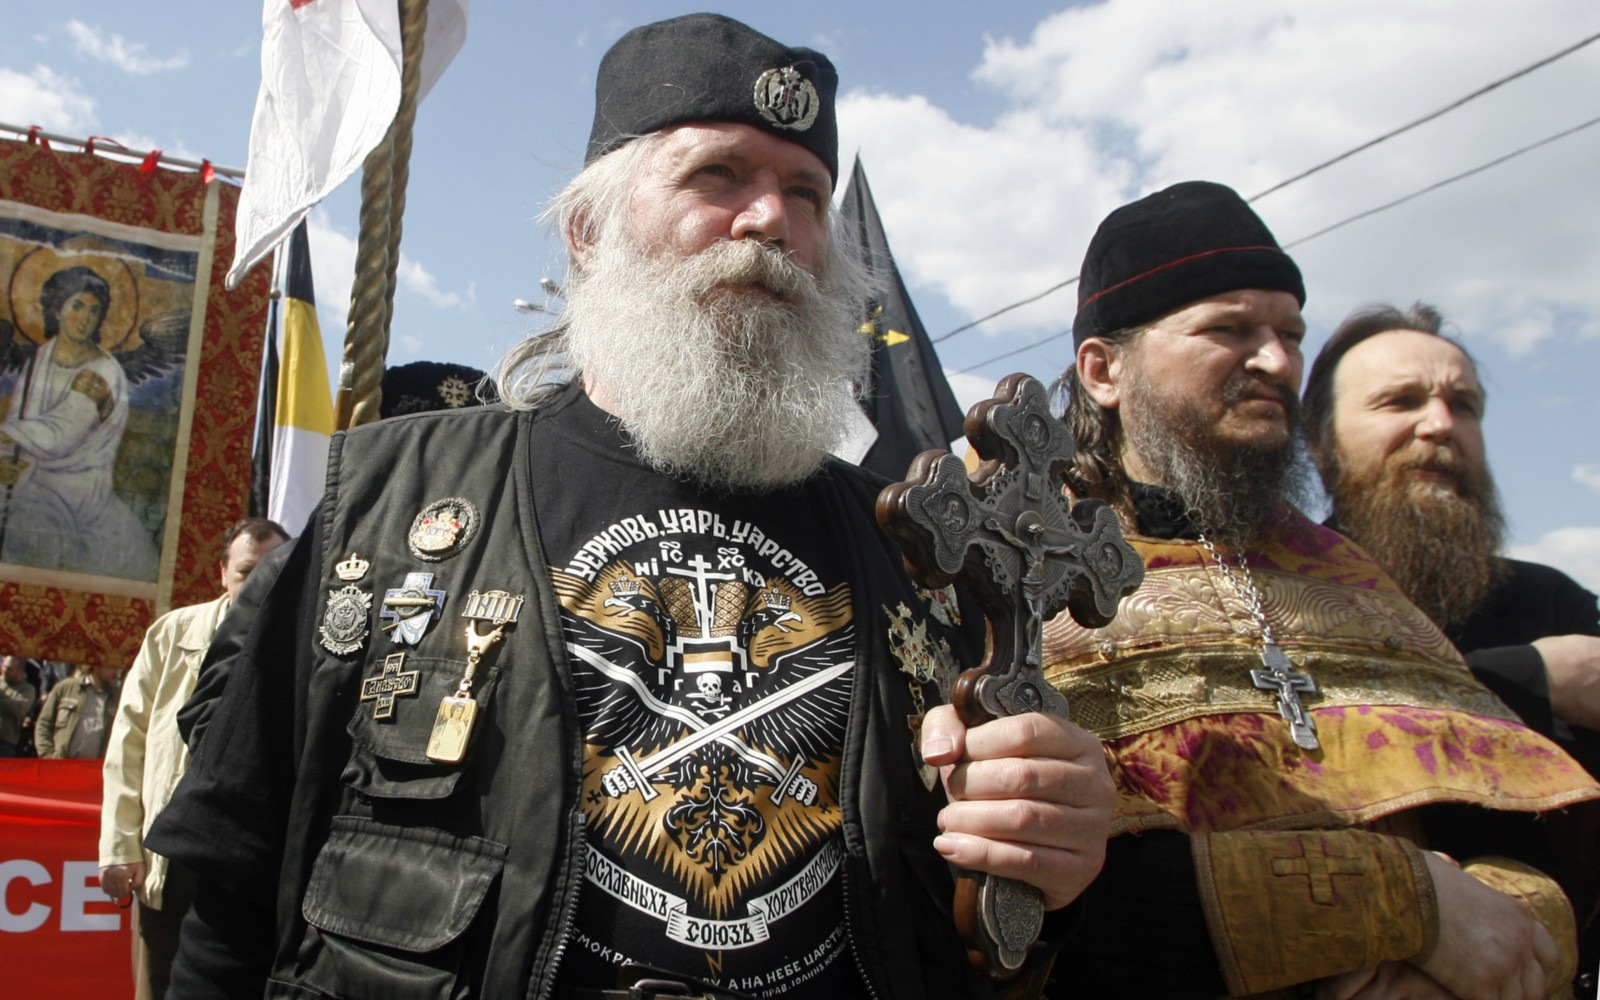 Alexander Dugin, the leader of the Eurasian Movement (far right) takes part in a Russian nationalists’ rally in support of Serbia in Moscow, Russia, Sunday, April 27, 2008. (Photo: Mikhail Metzel/AP)